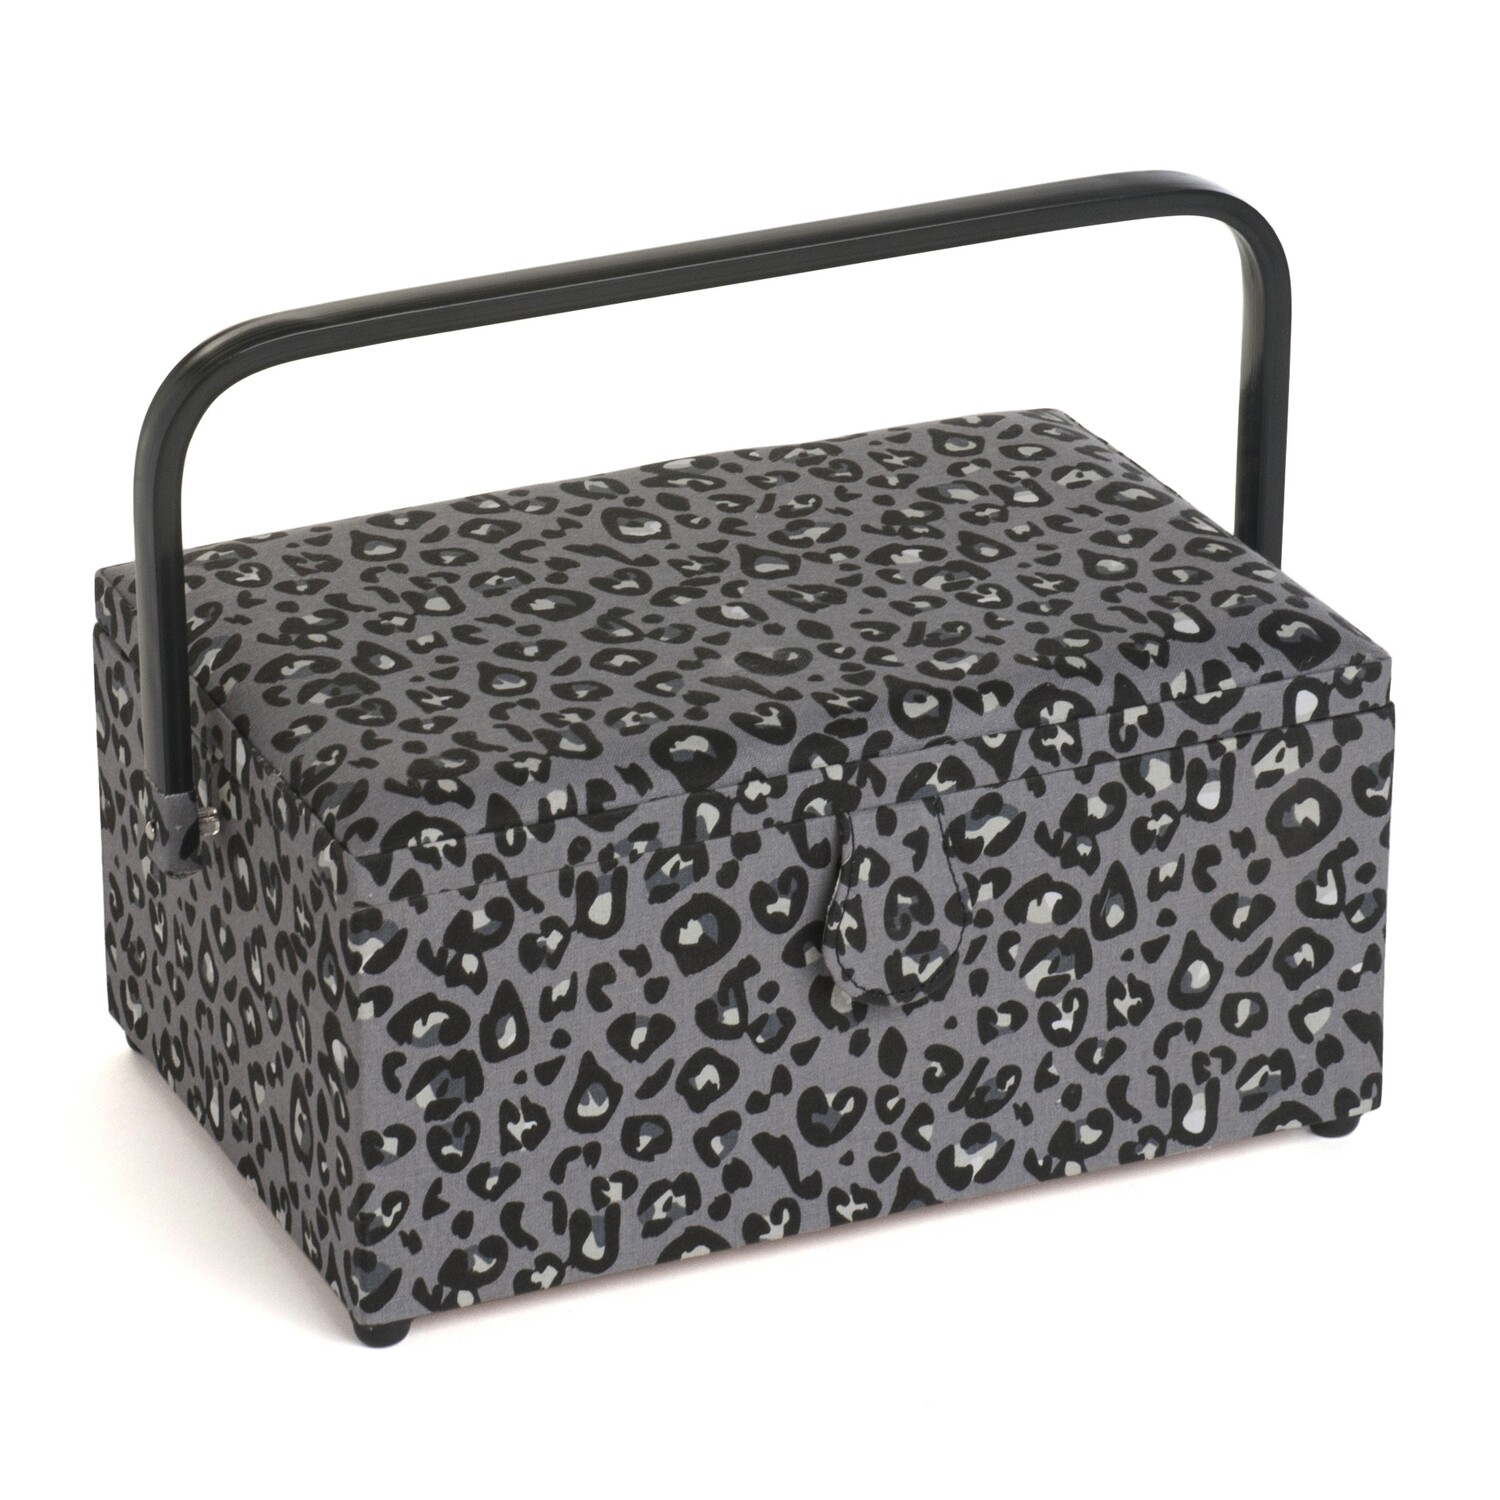 Sewing Box Cantilever Large - Leopard